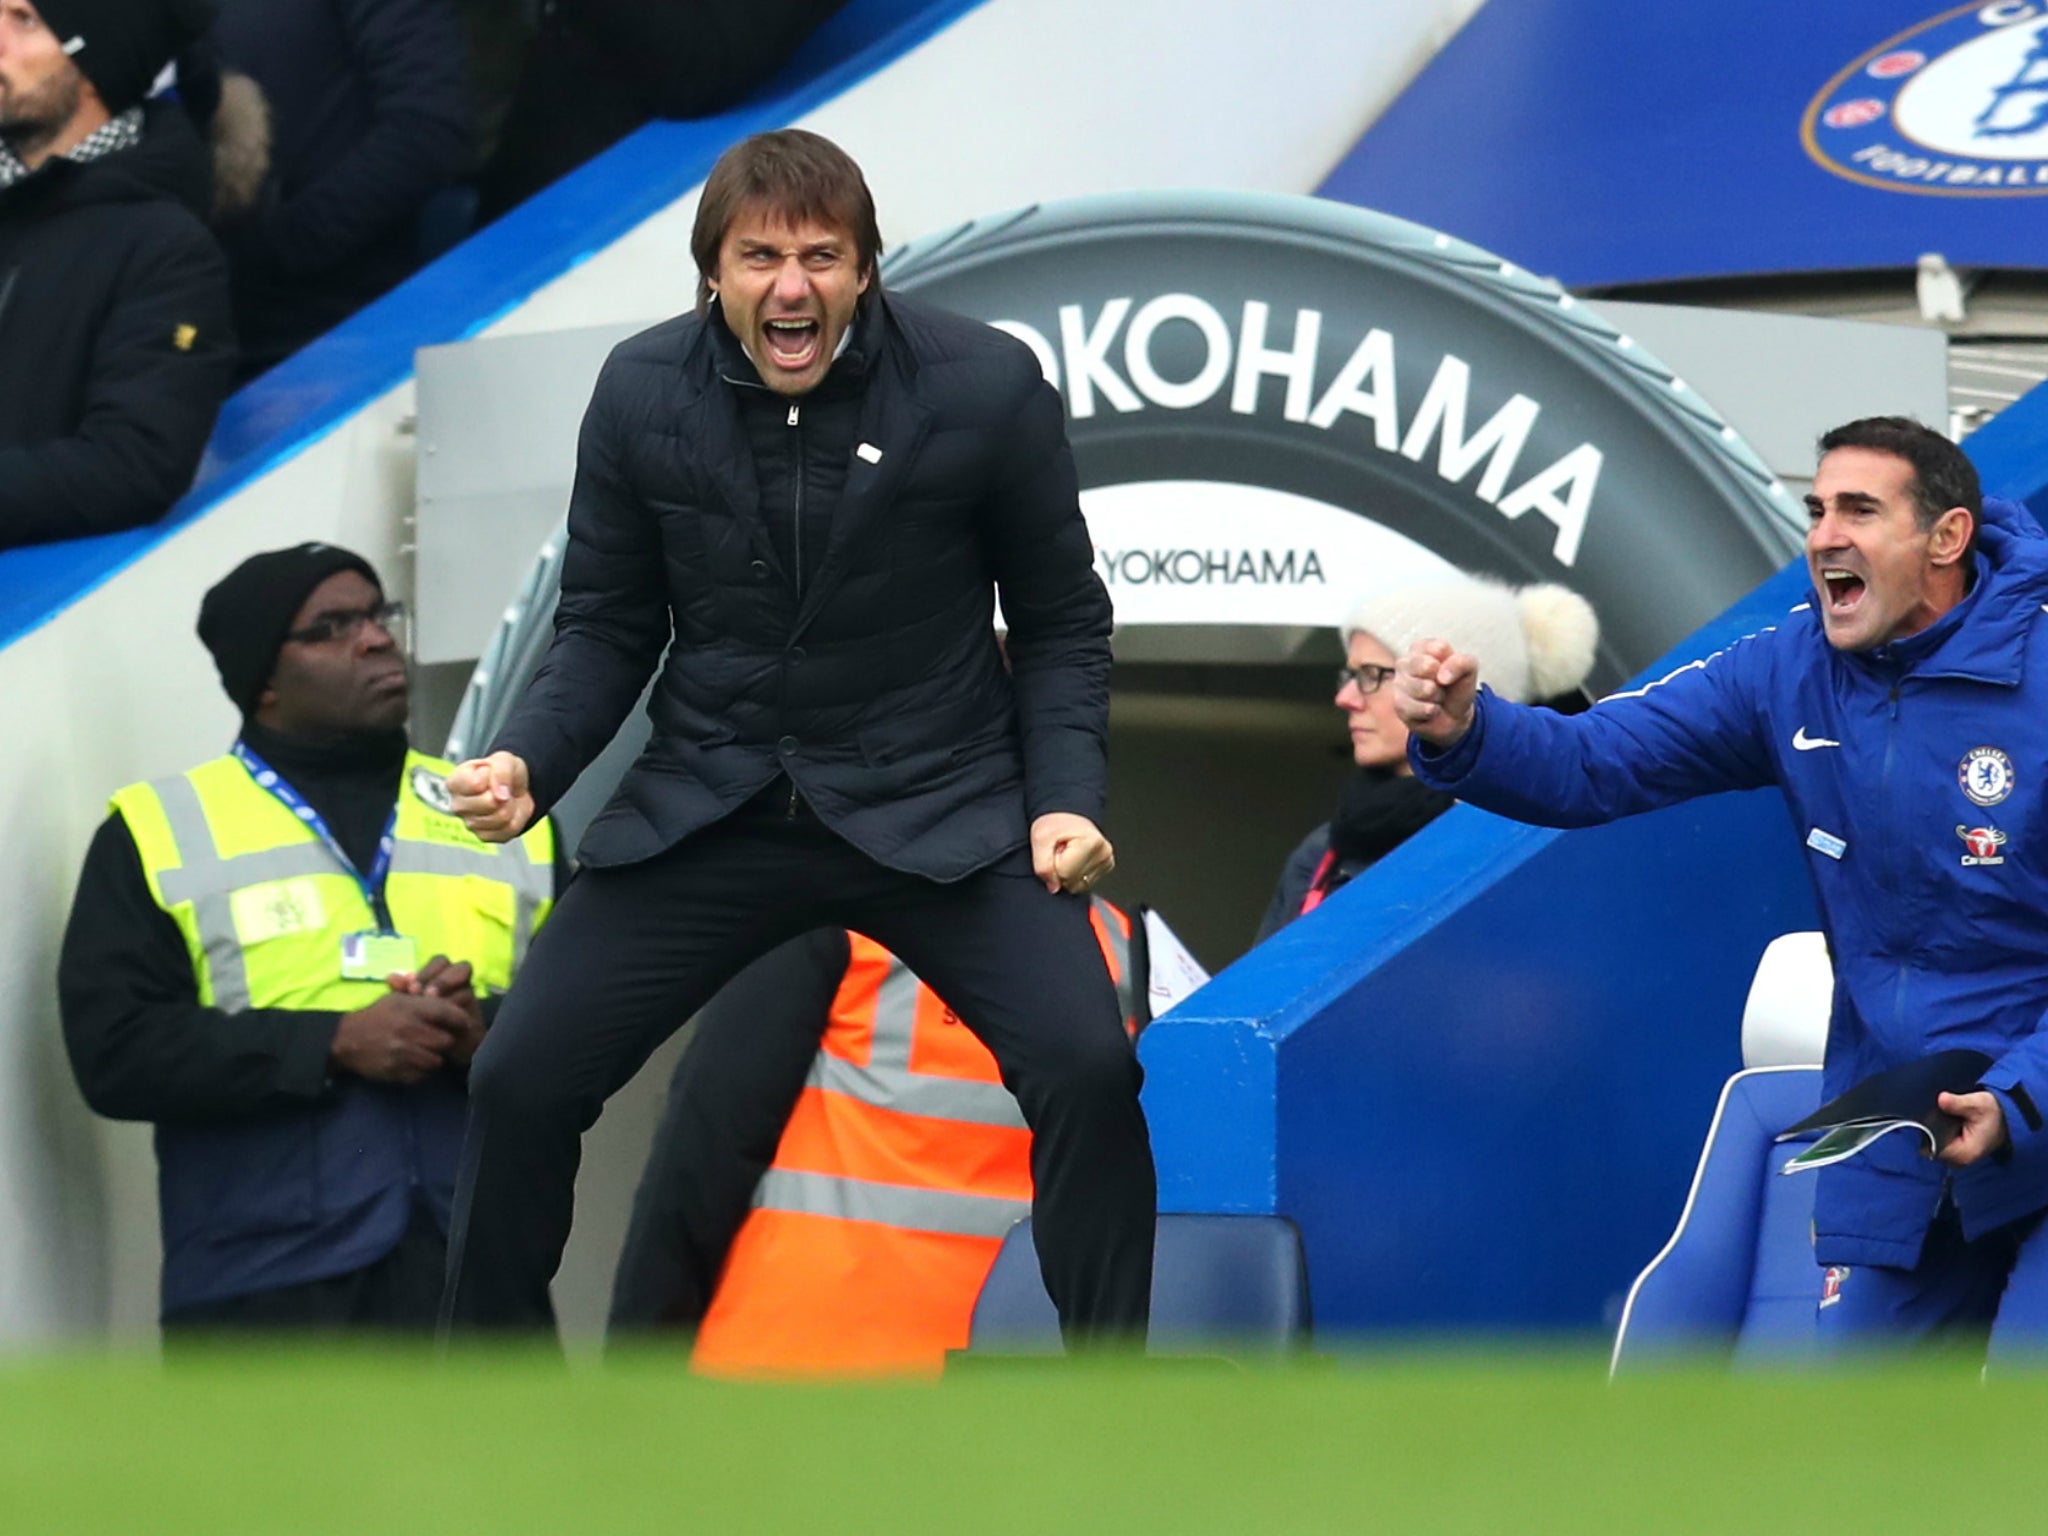 Antonio Conte was pleased to see his side come from behind and take all three points